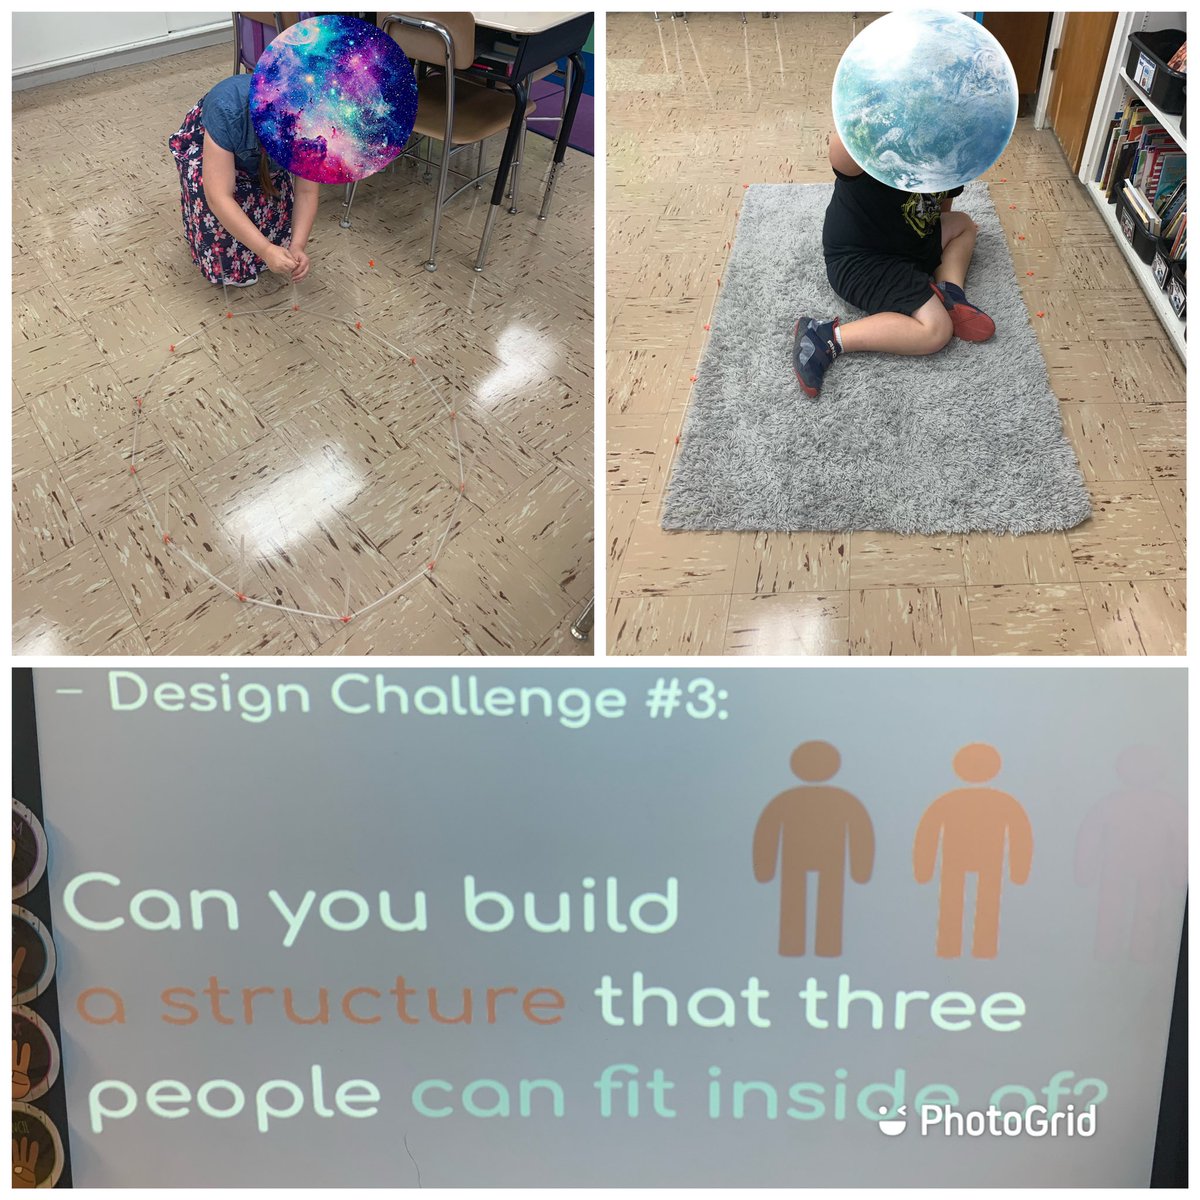 Challenge accepted! Students imagine possibilities of designing shapes into forms! Our favorite part of the day is science! #STEM #engagement #inquiry